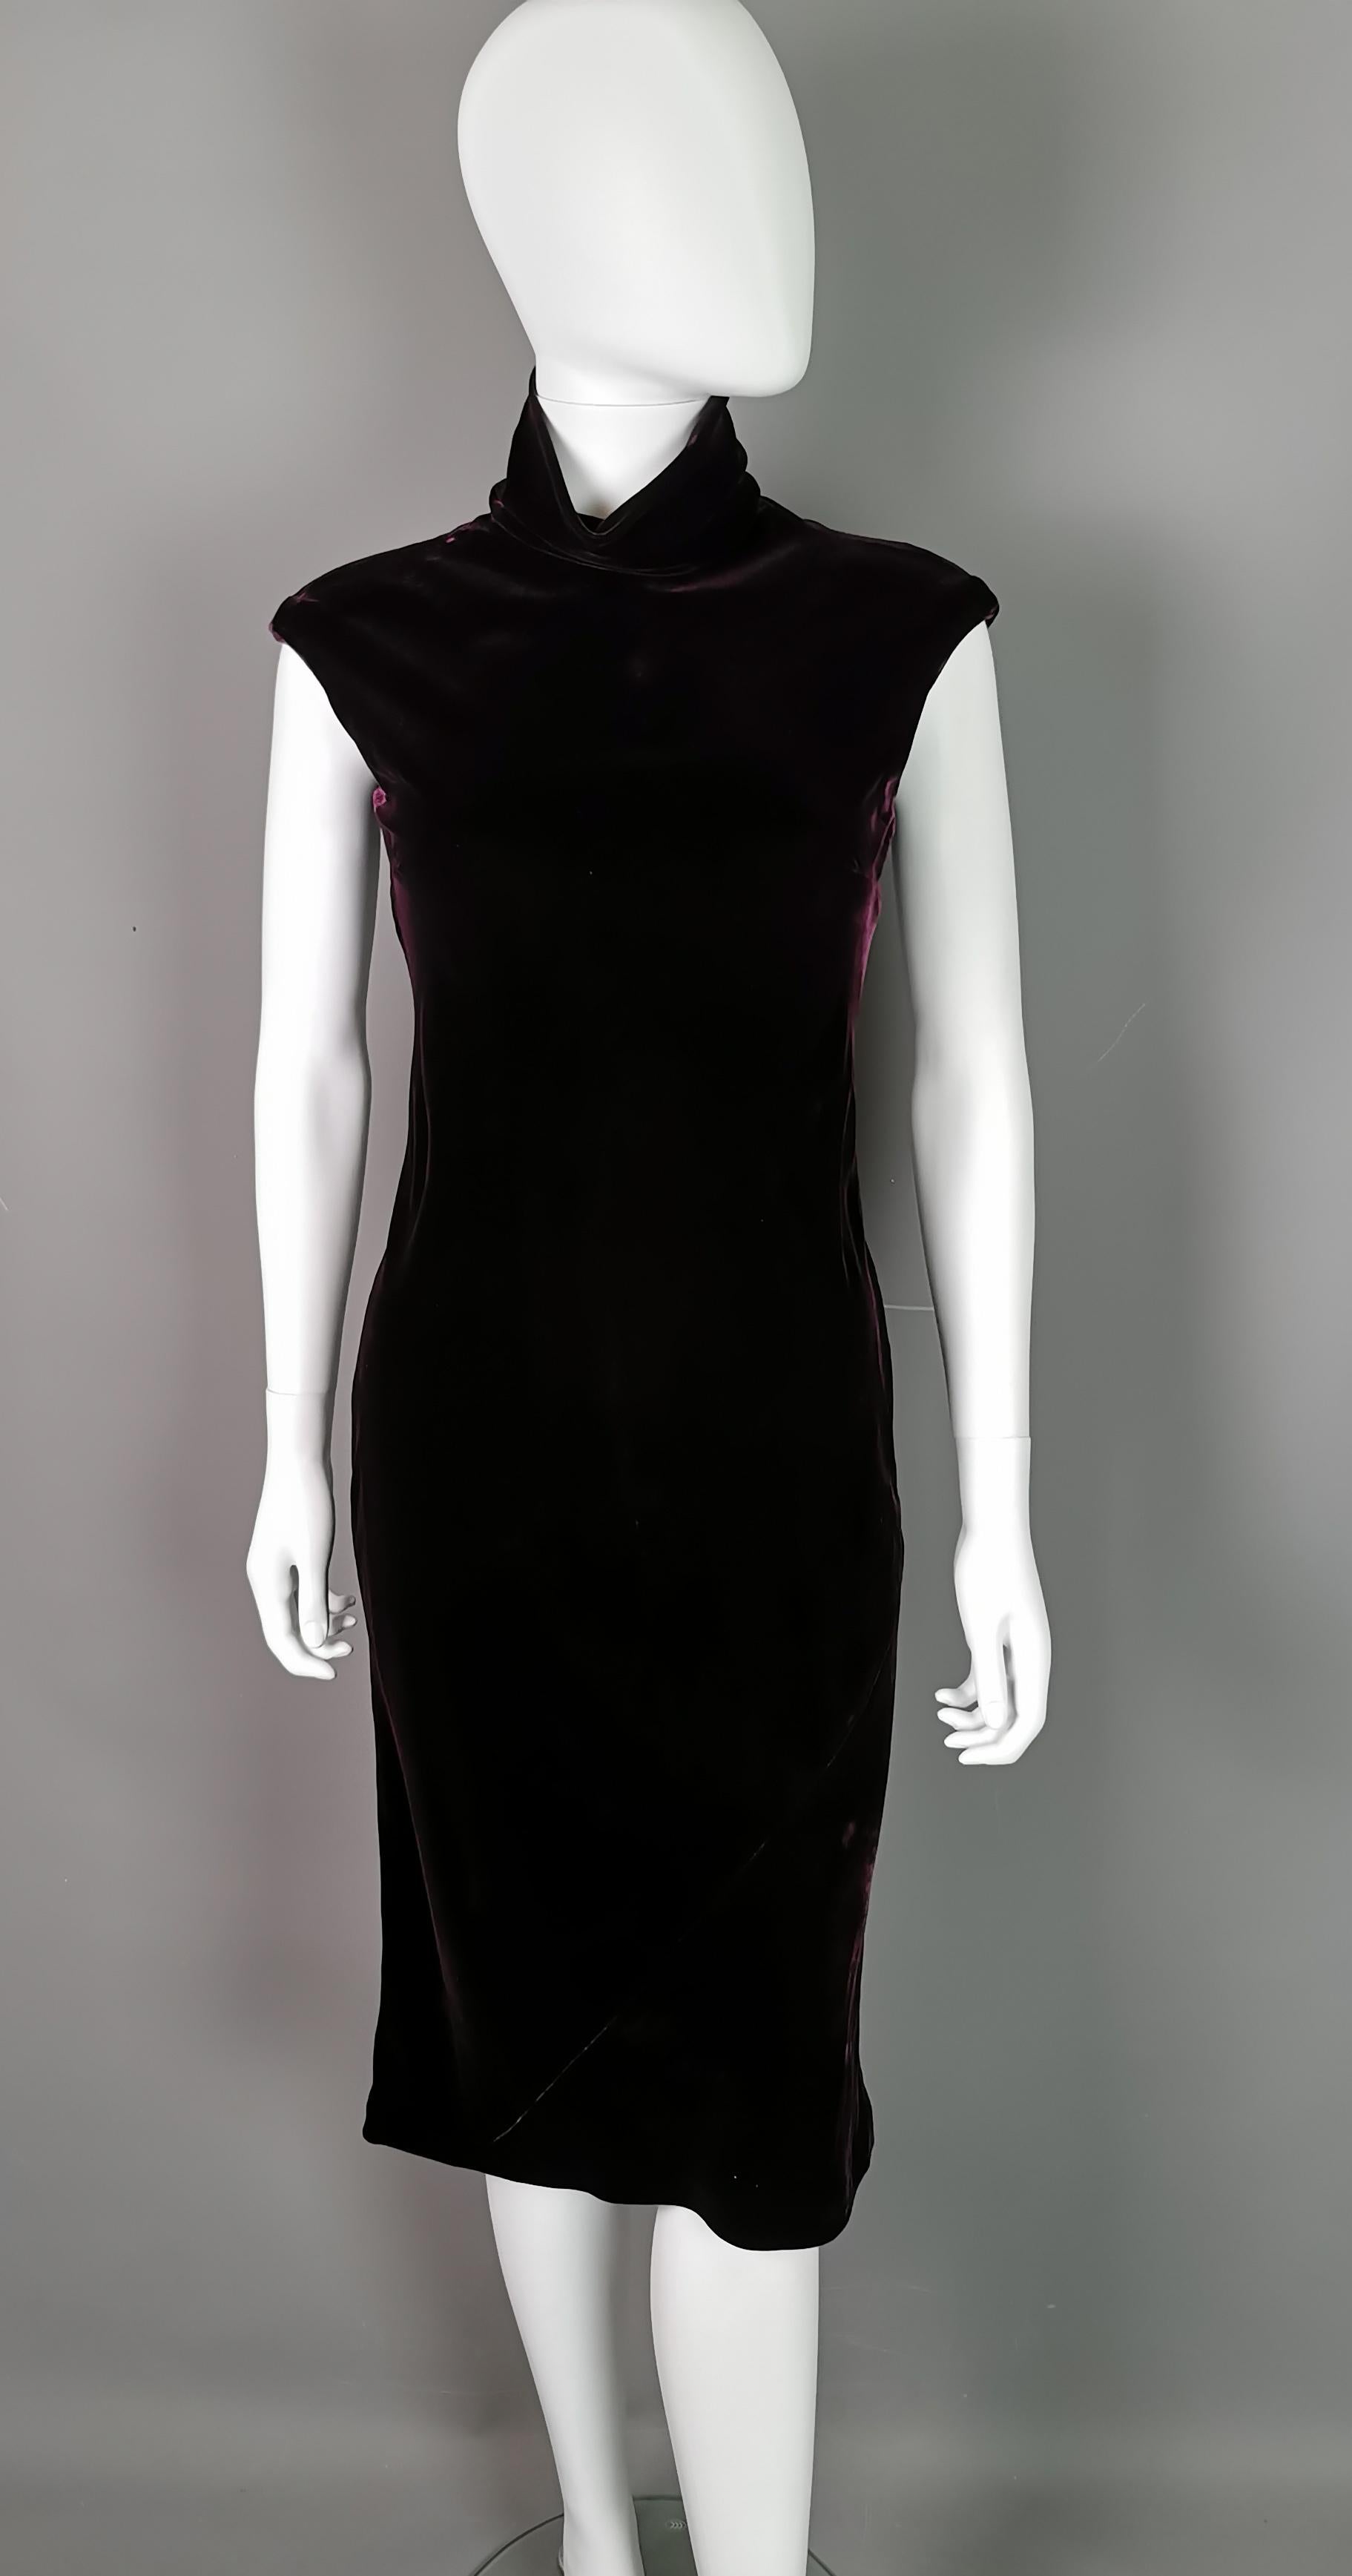 A stunning vintage Tom Ford for Gucci rich burgandy velvet dress

Now this is a dress you need in your vintage wardrobe!

It exudes luxe 90s grunge vibes and can be dressed up or down, made from a soft short pile velvet in a rich, very dark bordeaux